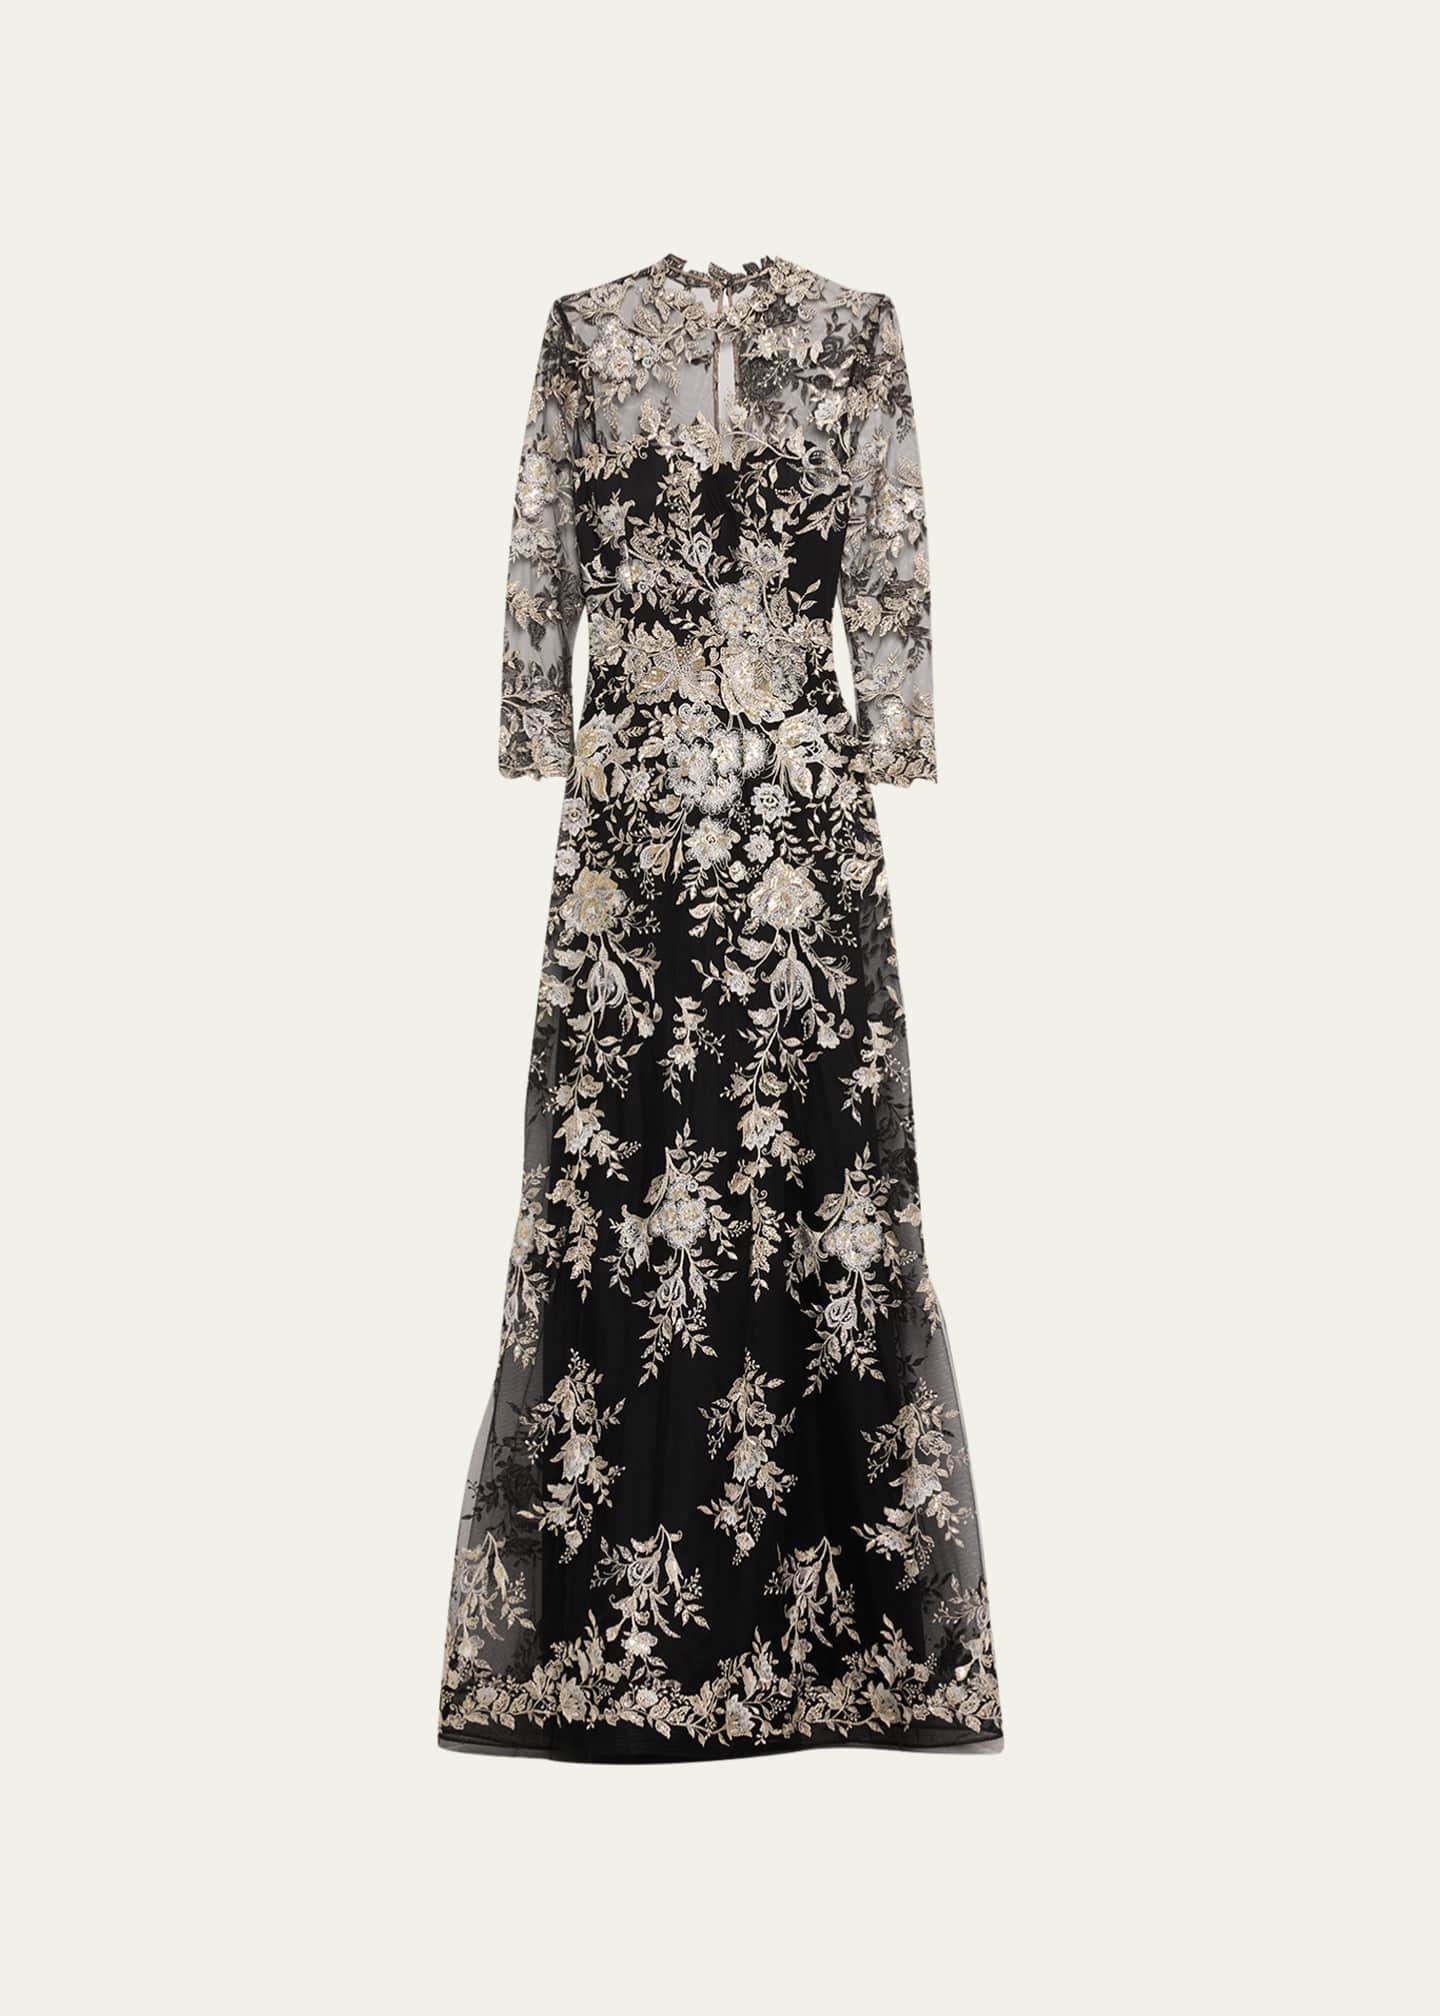 Rickie Freeman for Teri Jon Floral-Embroidered Mock-Neck Tulle Gown